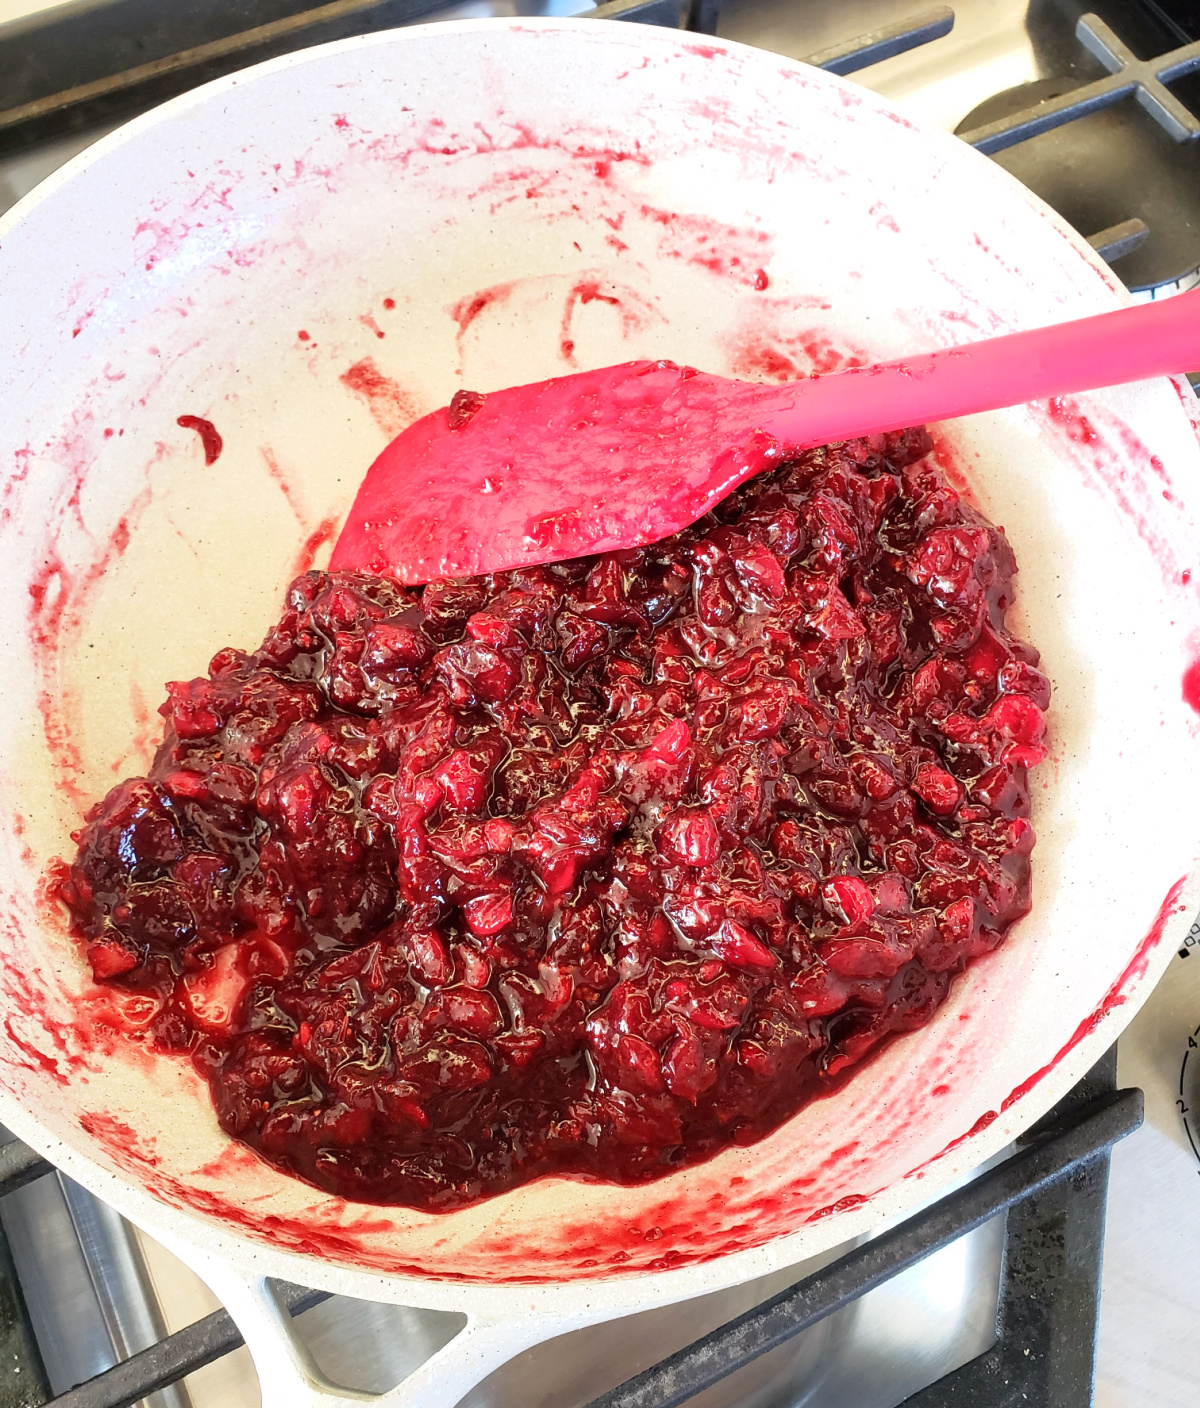 A red spatula in a white skillet shows how thick and jam-like the cranberry sauce isd jam-like